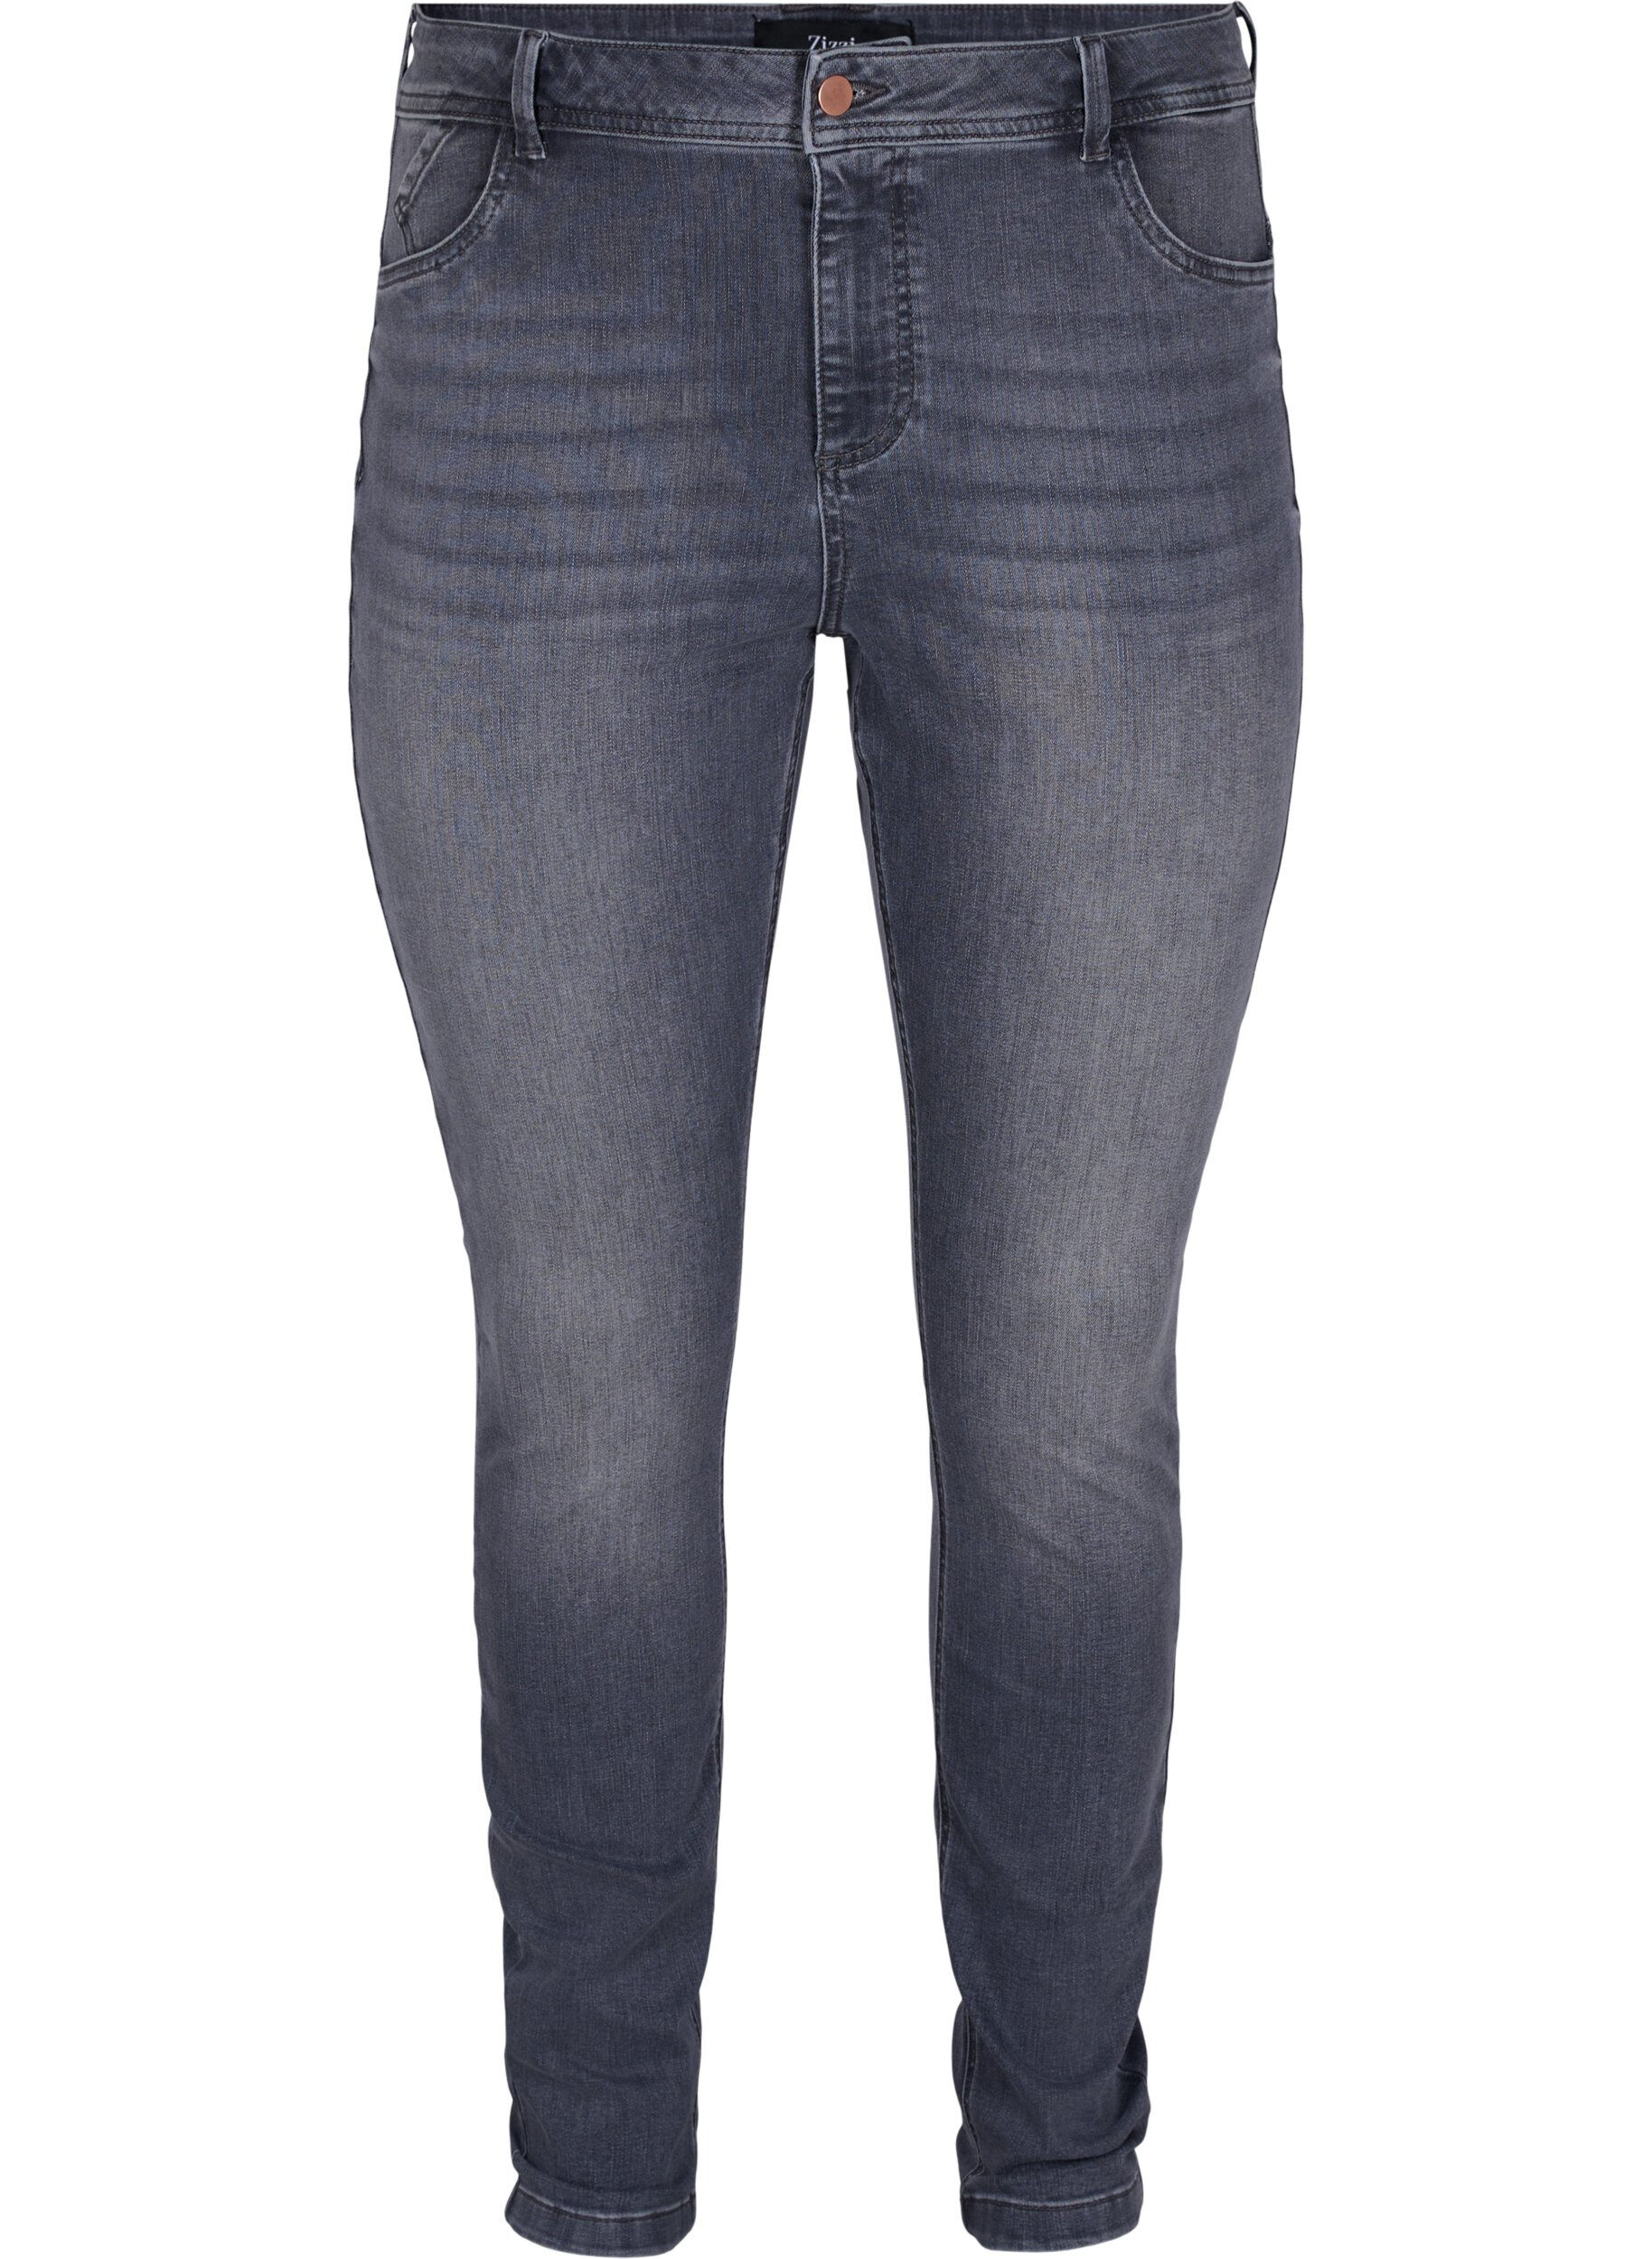 WOMEN FASHION Jeans Worn-in Gray ONLY Jeggings & Skinny & Slim discount 56% 